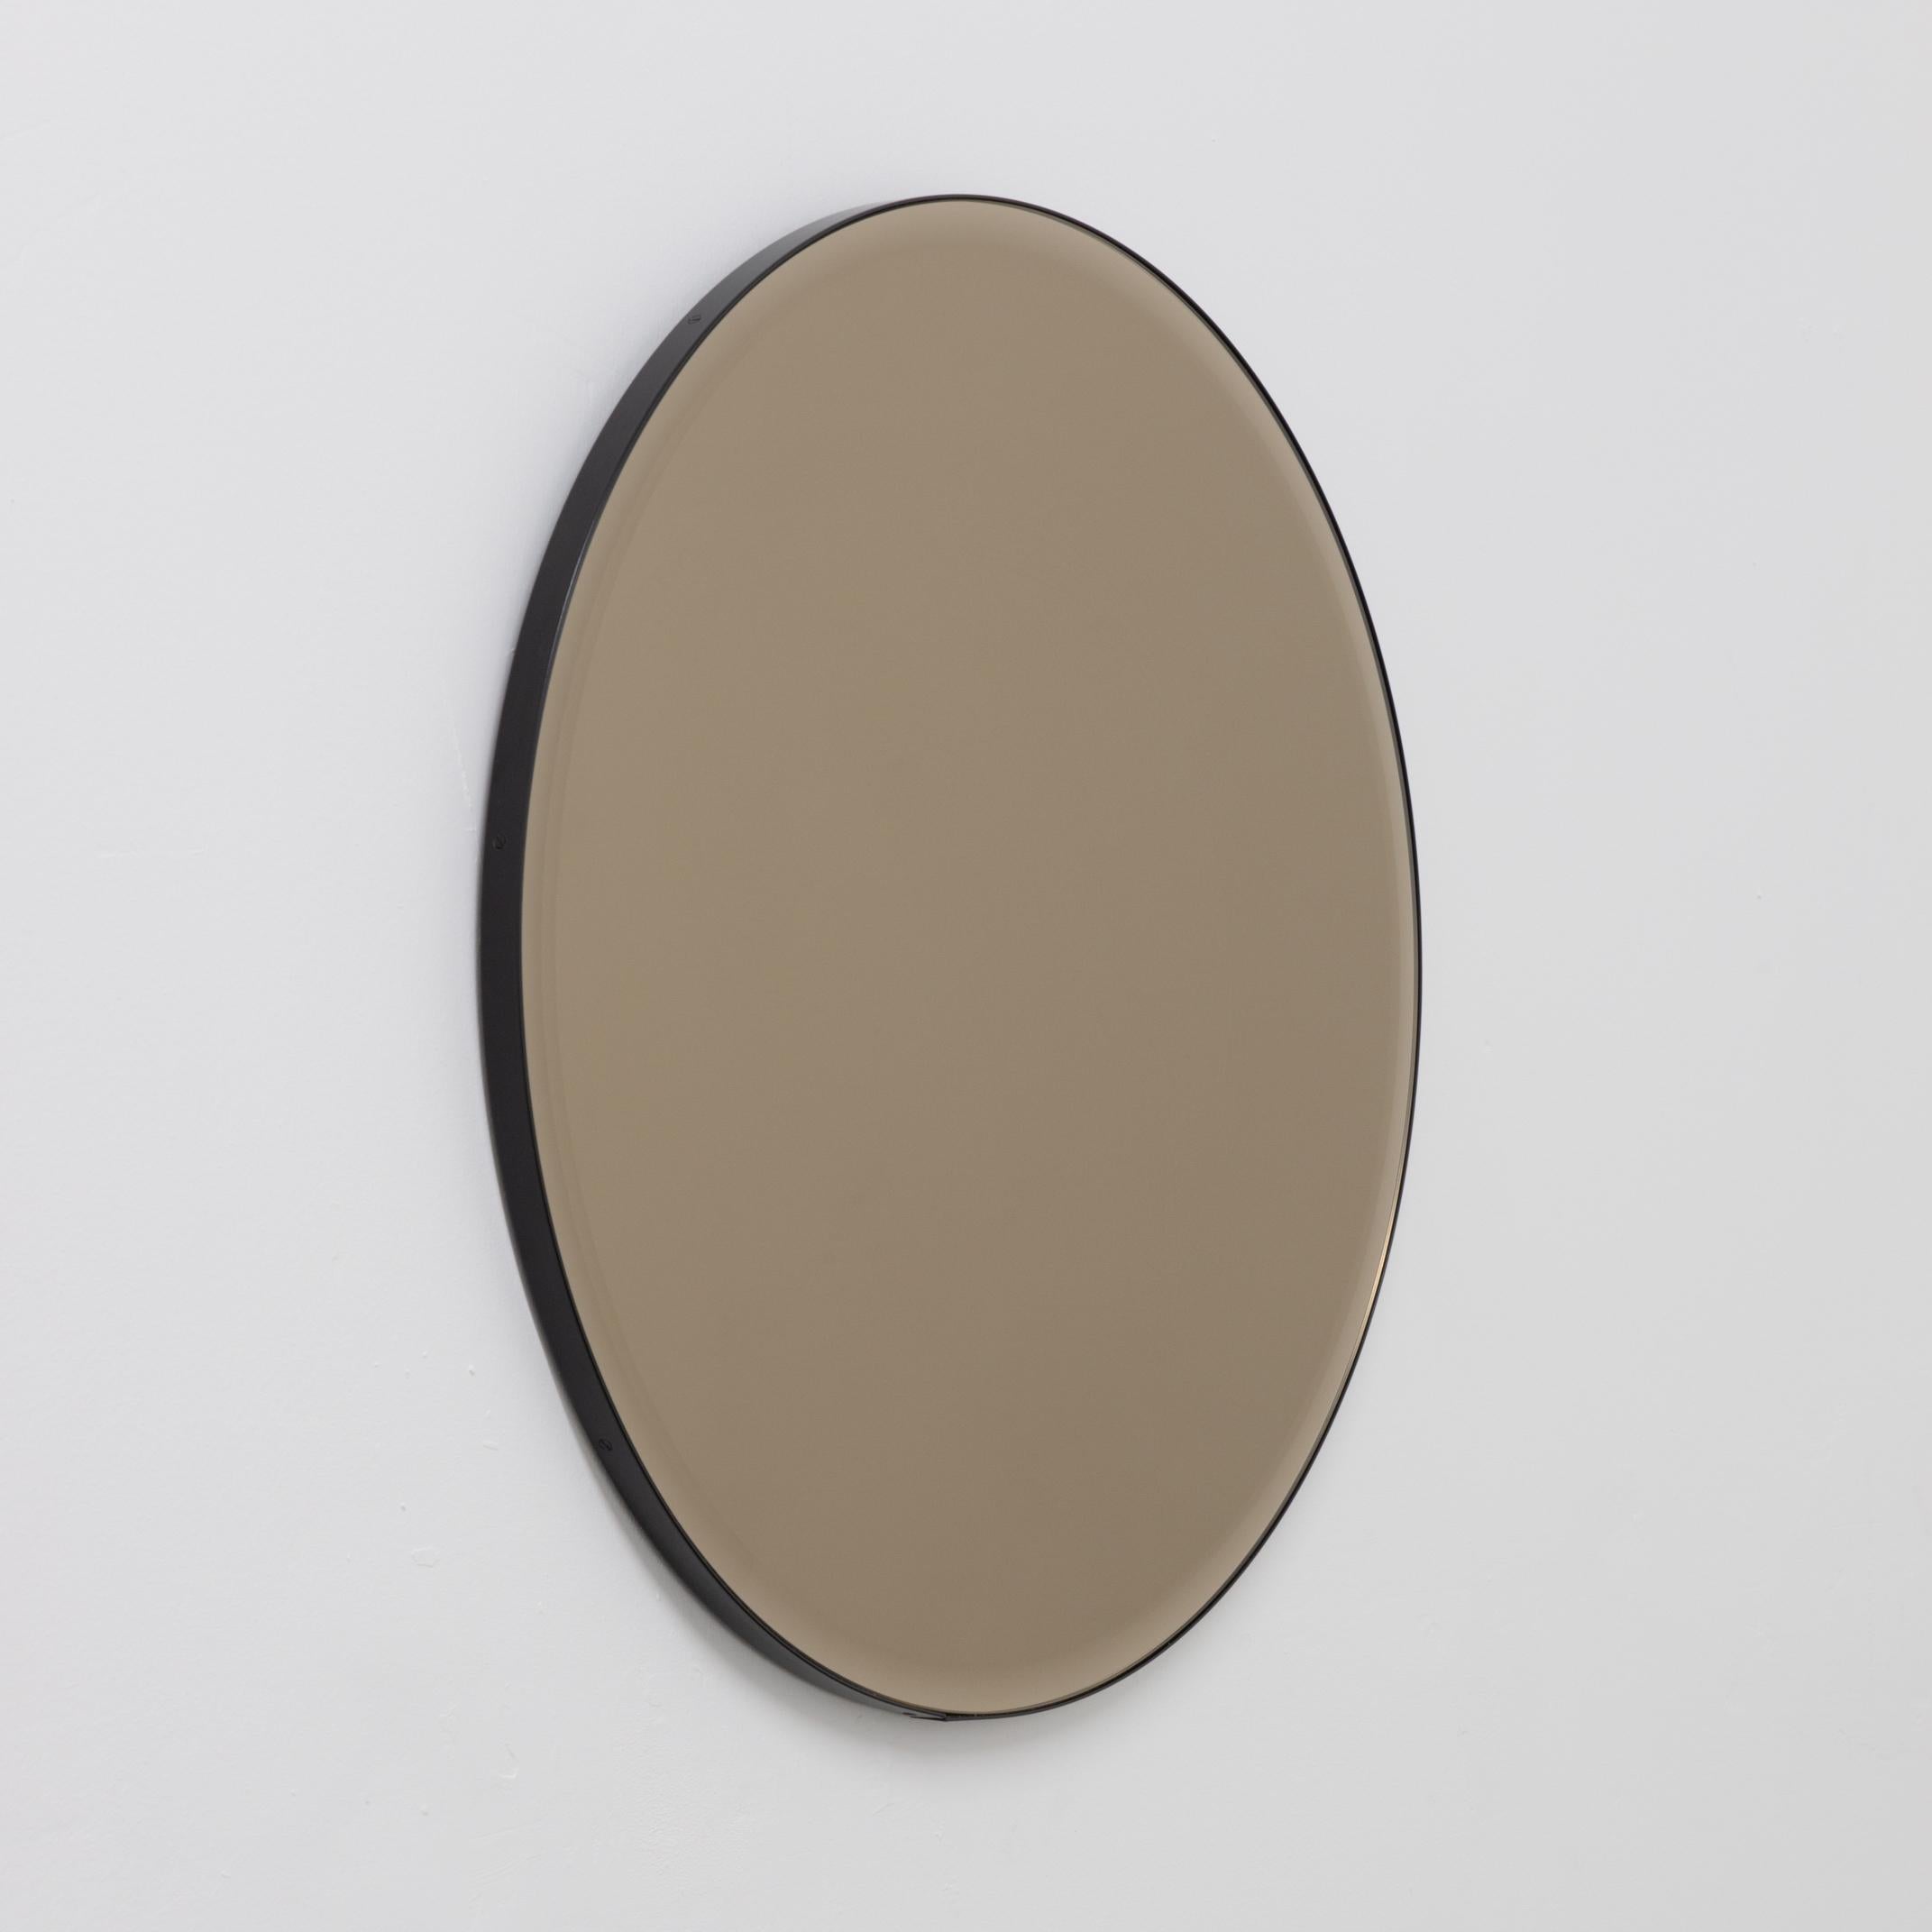 Art Deco style bevelled bronze tinted round mirror with an elegant aluminium powder coated black frame. Designed and handcrafted in London, UK.

Our mirrors are designed with an integrated French cleat (split batten) system that ensures the mirror